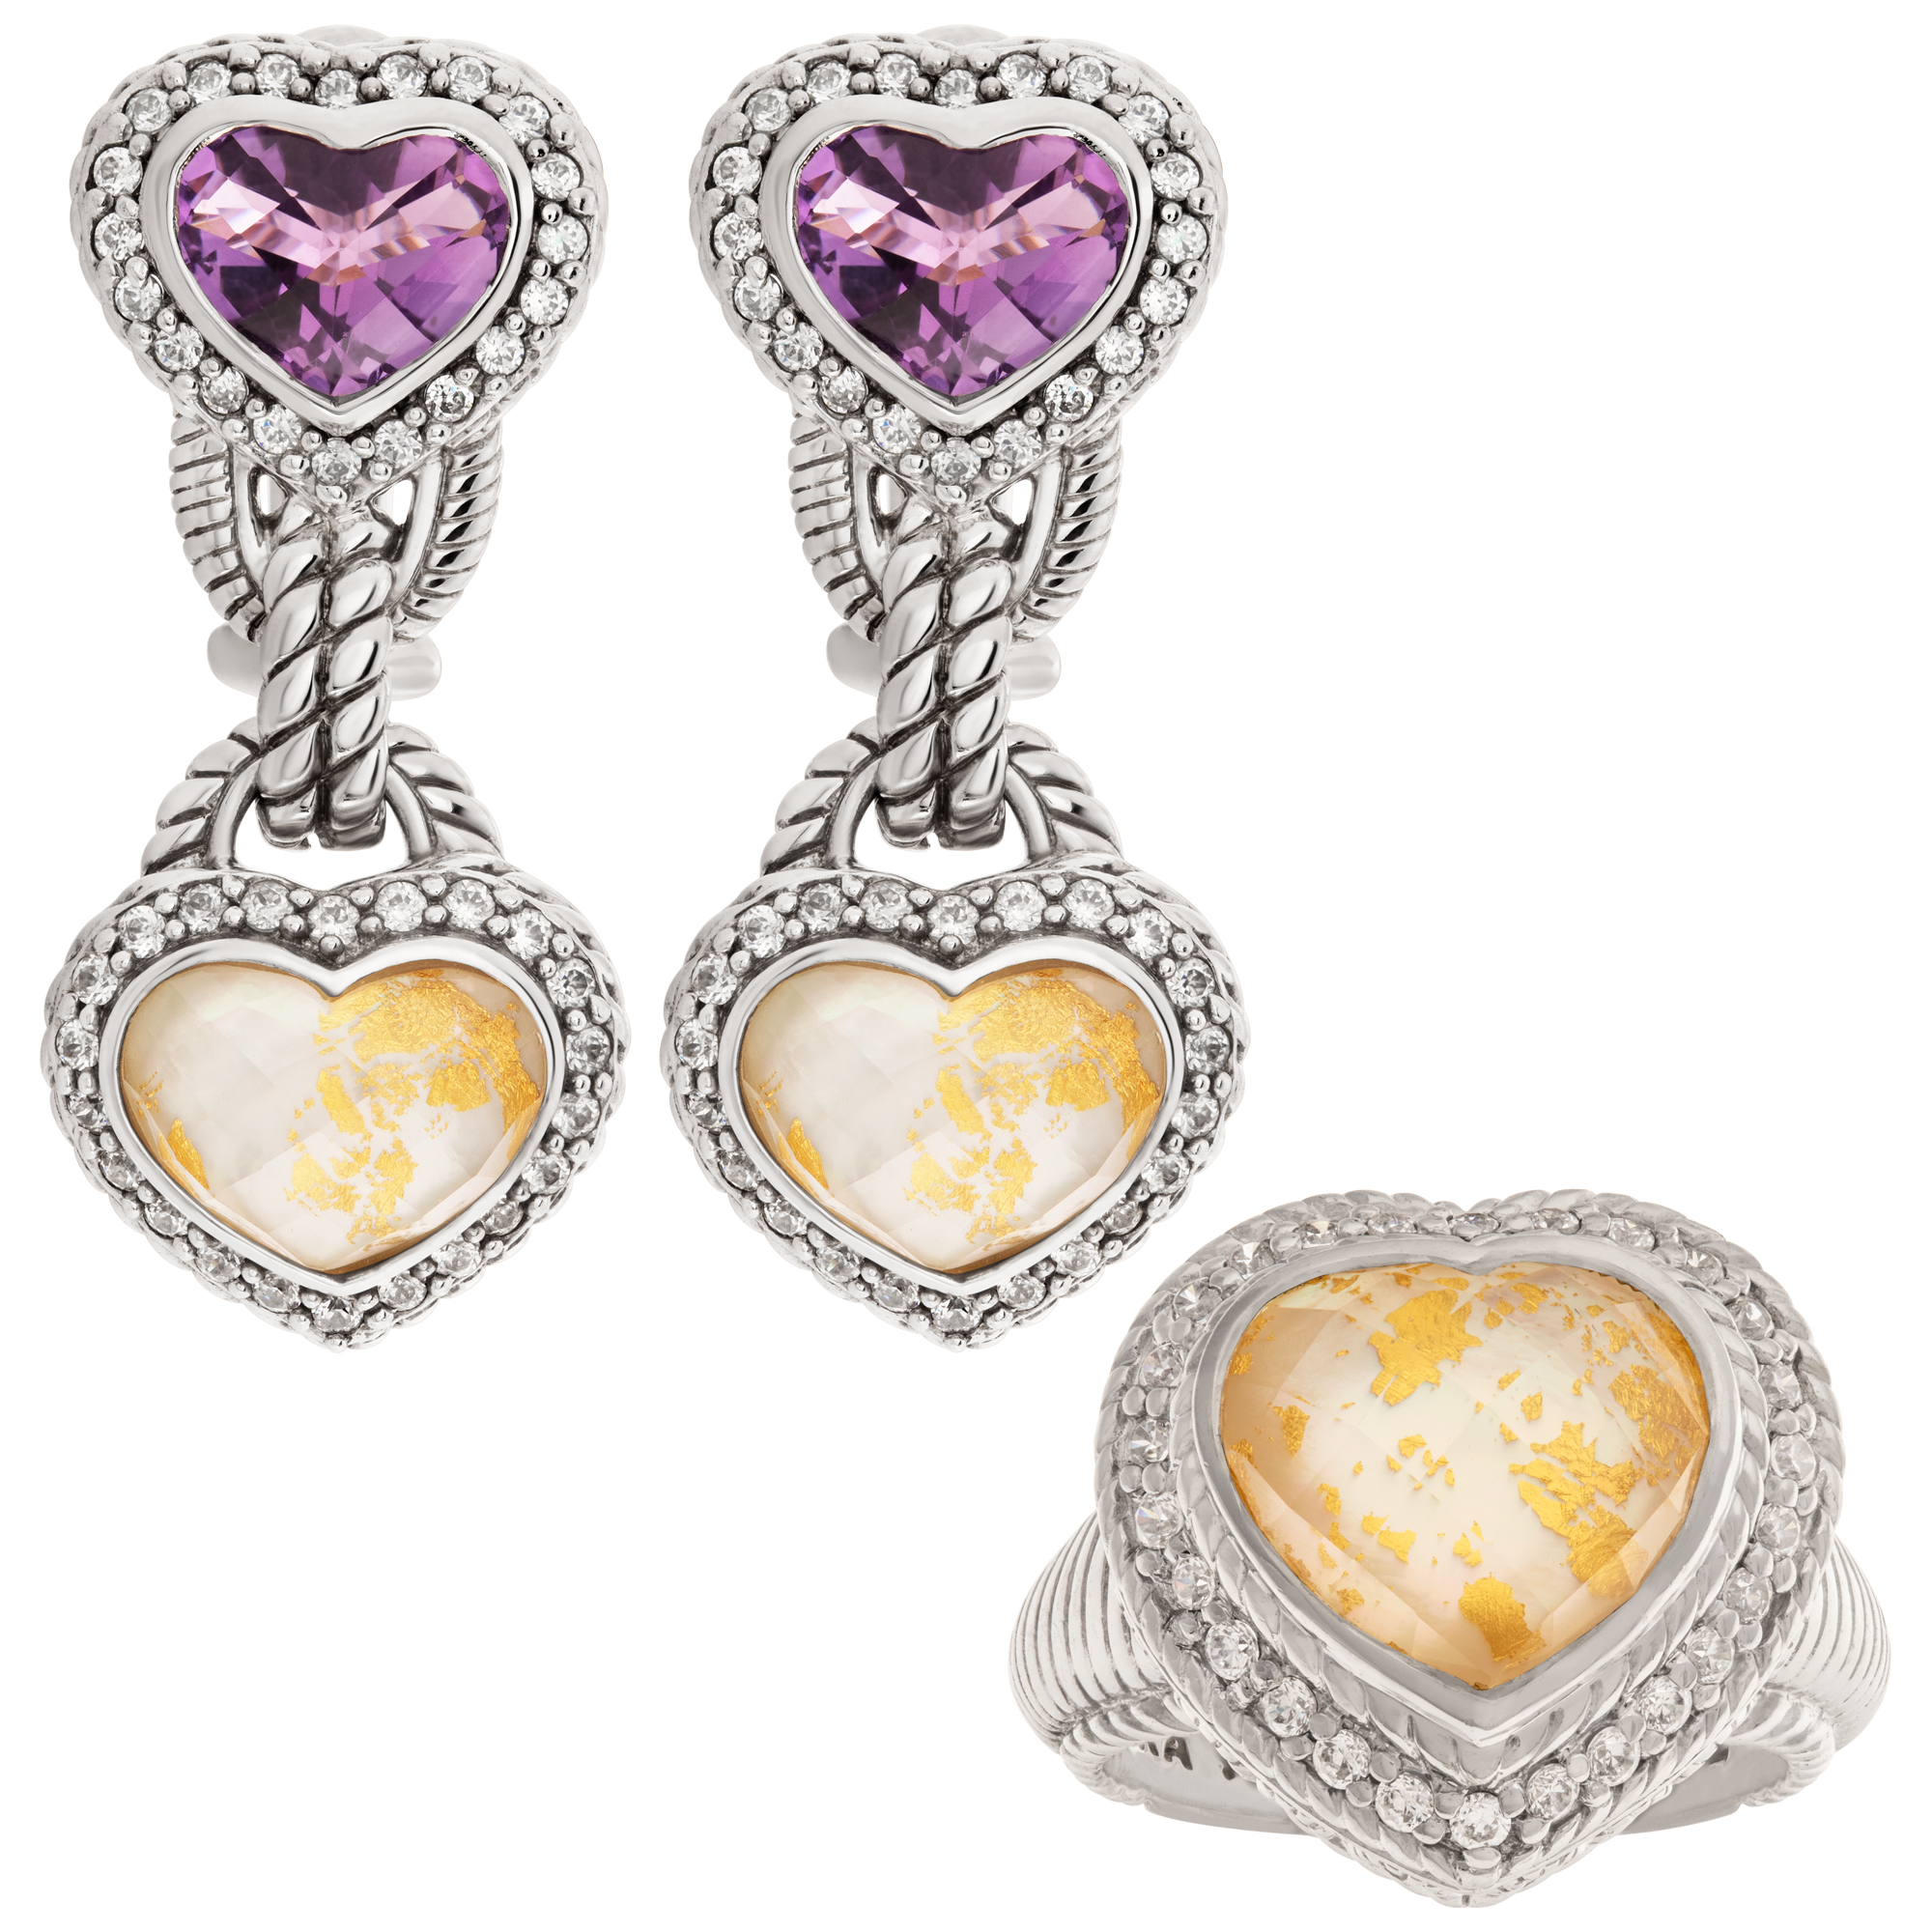 Judith Ripka earrings and ring set heart shaped amethyst and gold leaf doublet